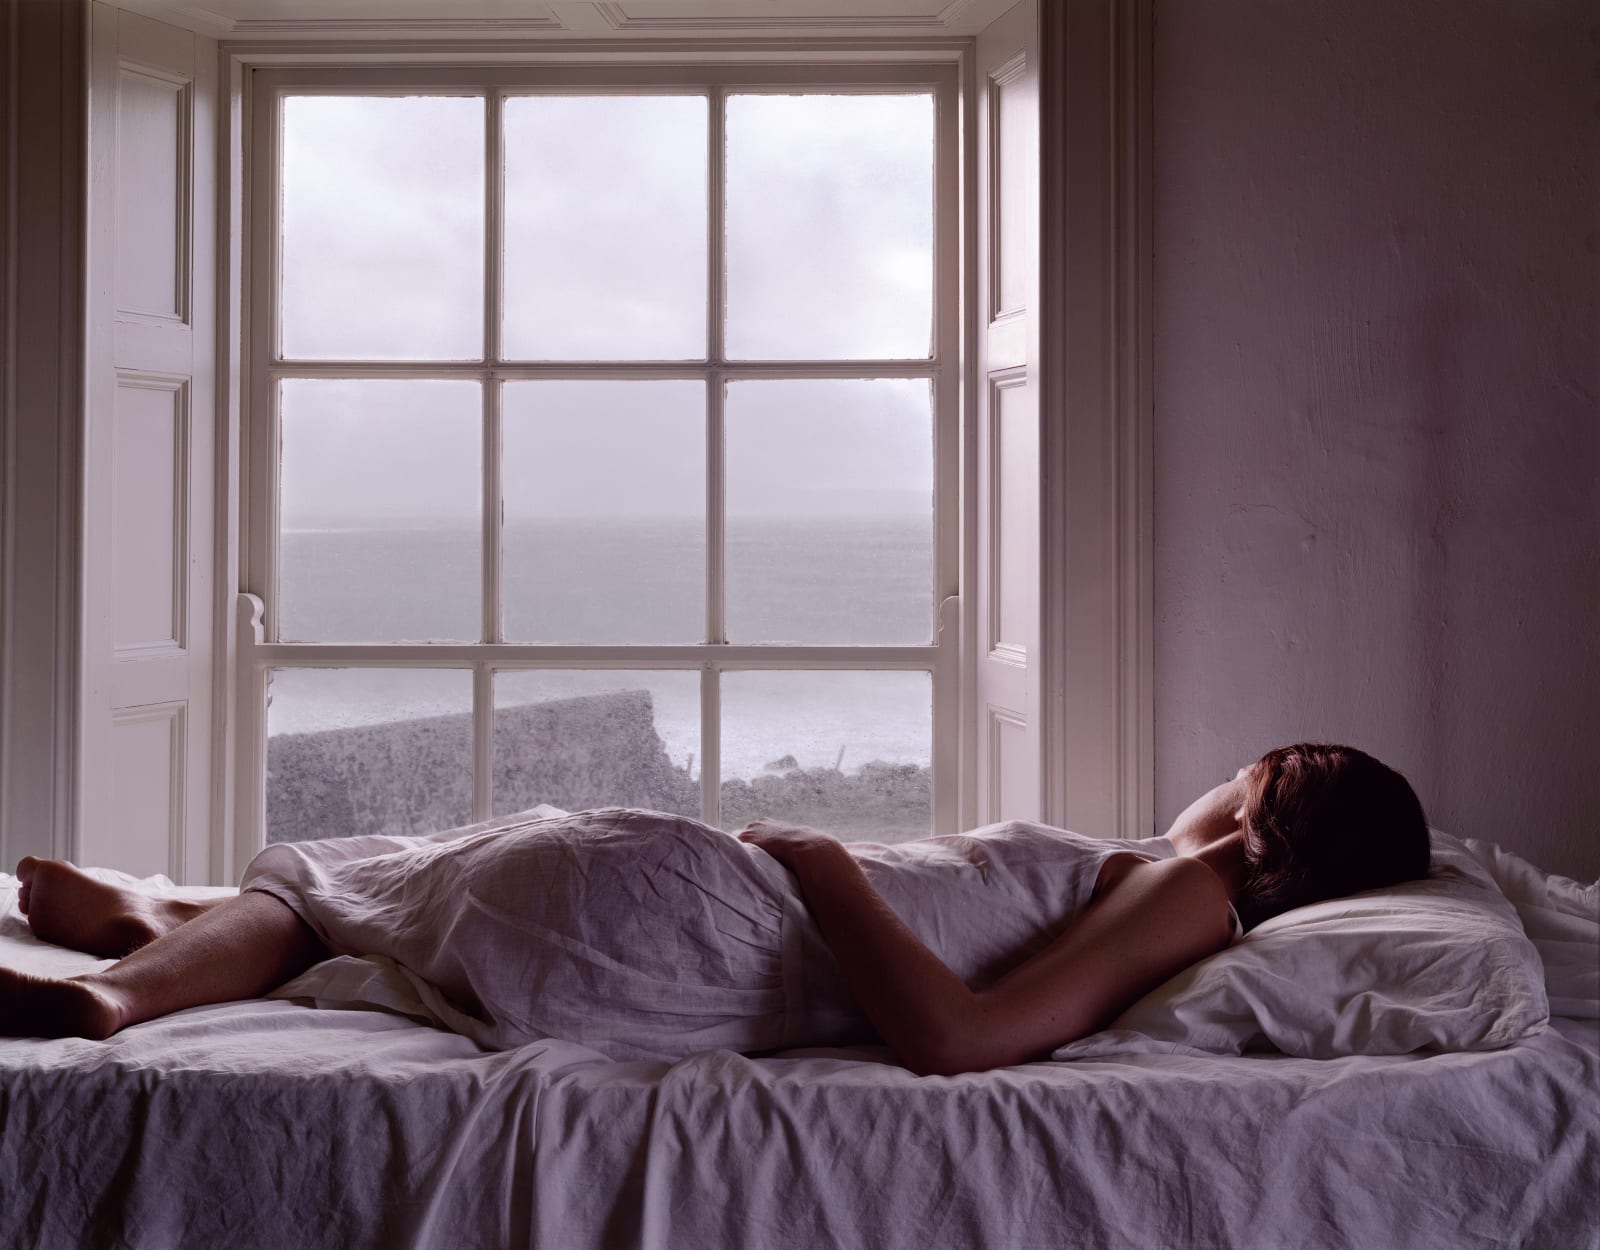 Danielle Nelson Mourning Self-Portrait on Bed, Mahery, Ireland. Archival Ink Print 46 x 59 in, 1 of 3 $10,000